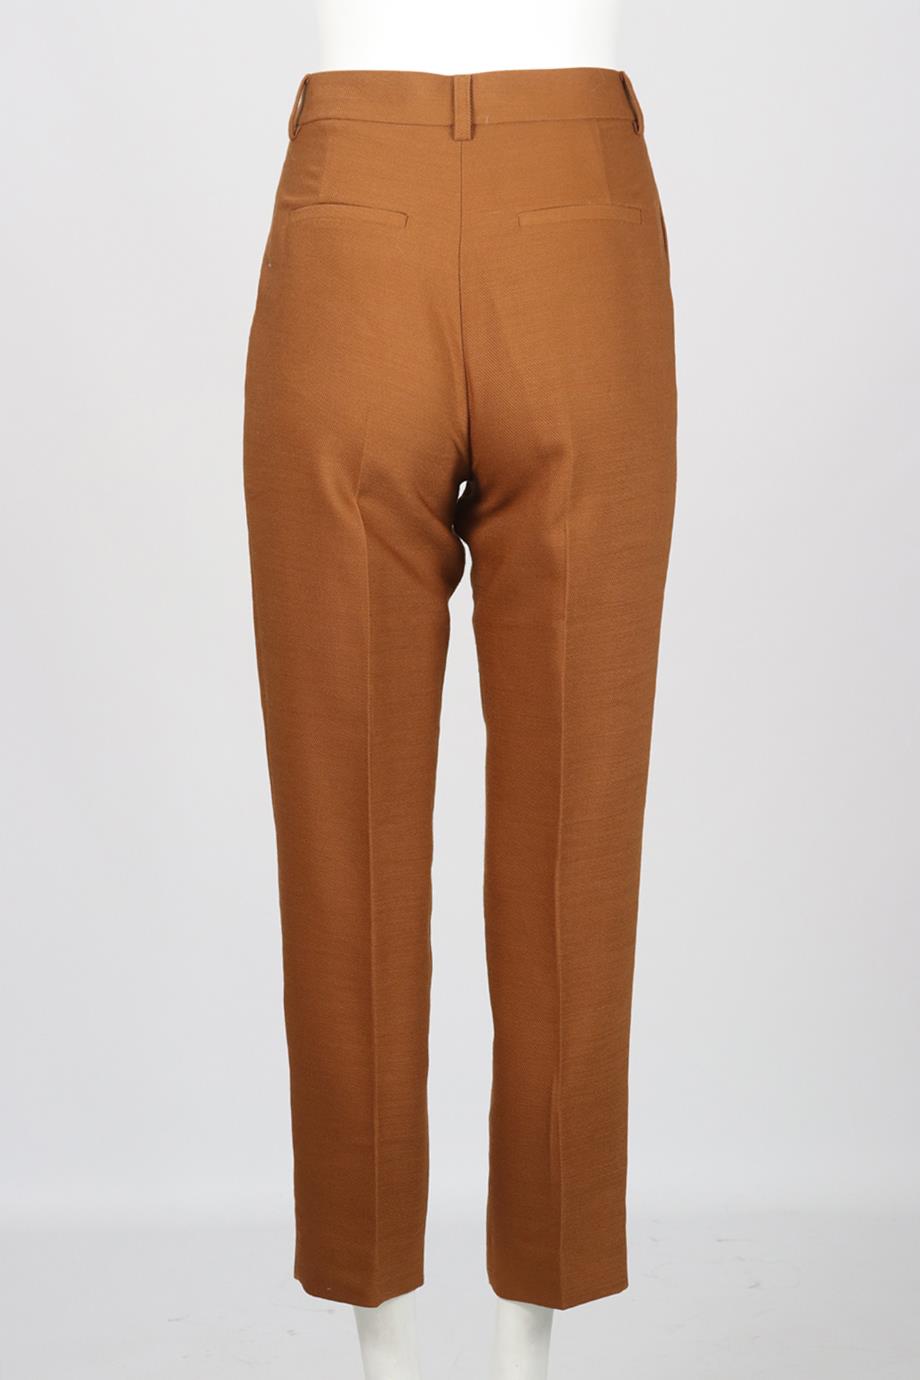 SEE BY CHLOÉ WOOL BLEND TAPERED PANTS FR 36 UK 8